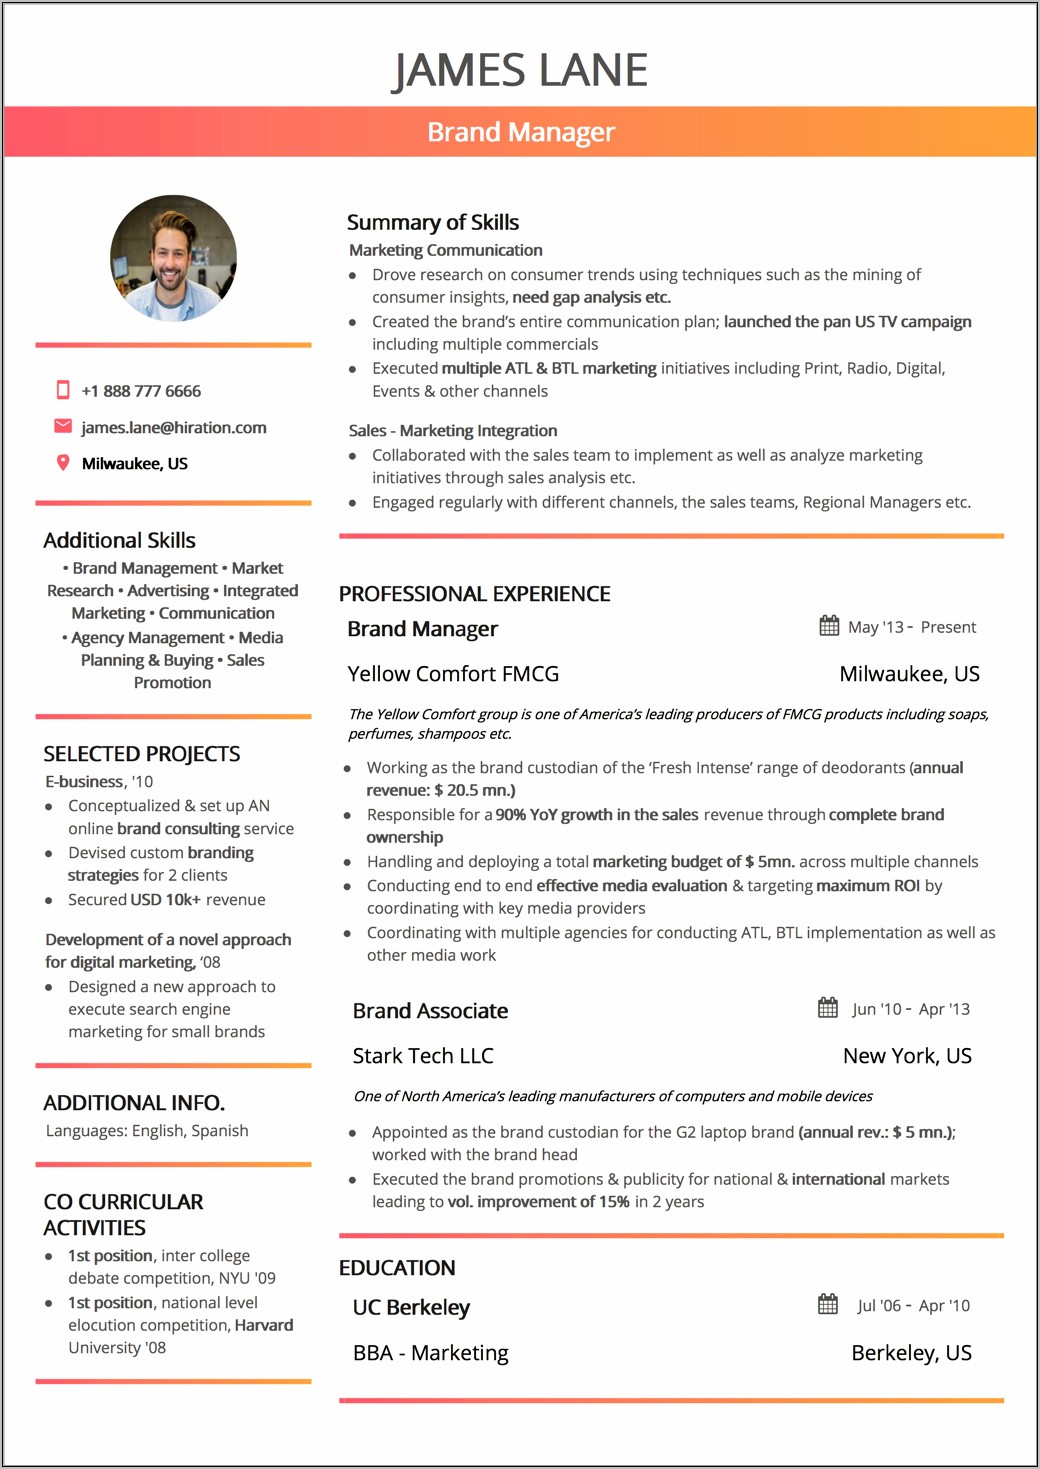 Business Analyst Resume With Jira Experience